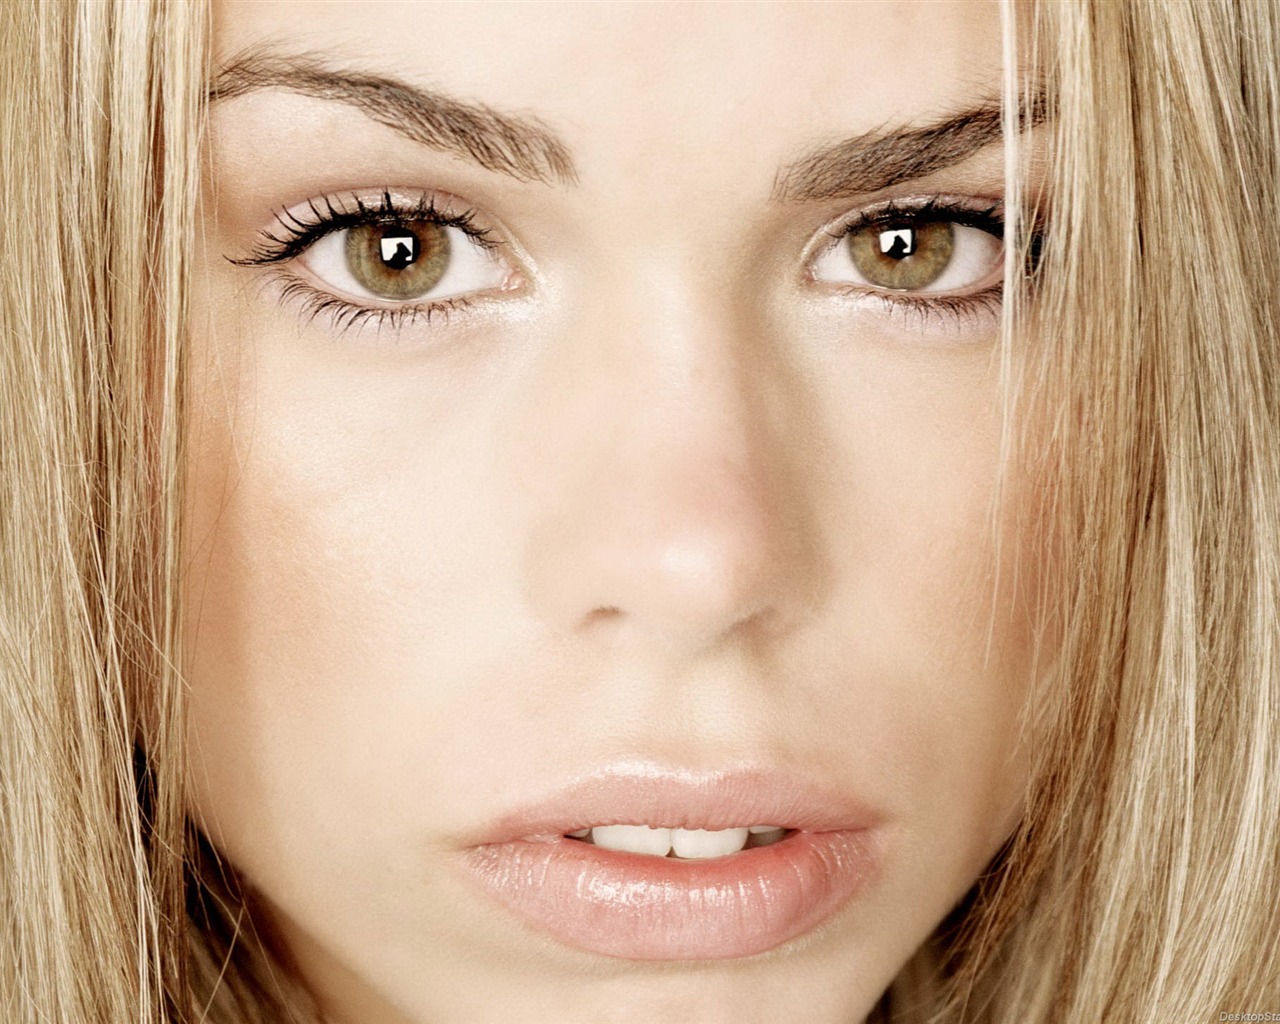 Billie Piper #015 - 1280x1024 Wallpapers Pictures Photos Images